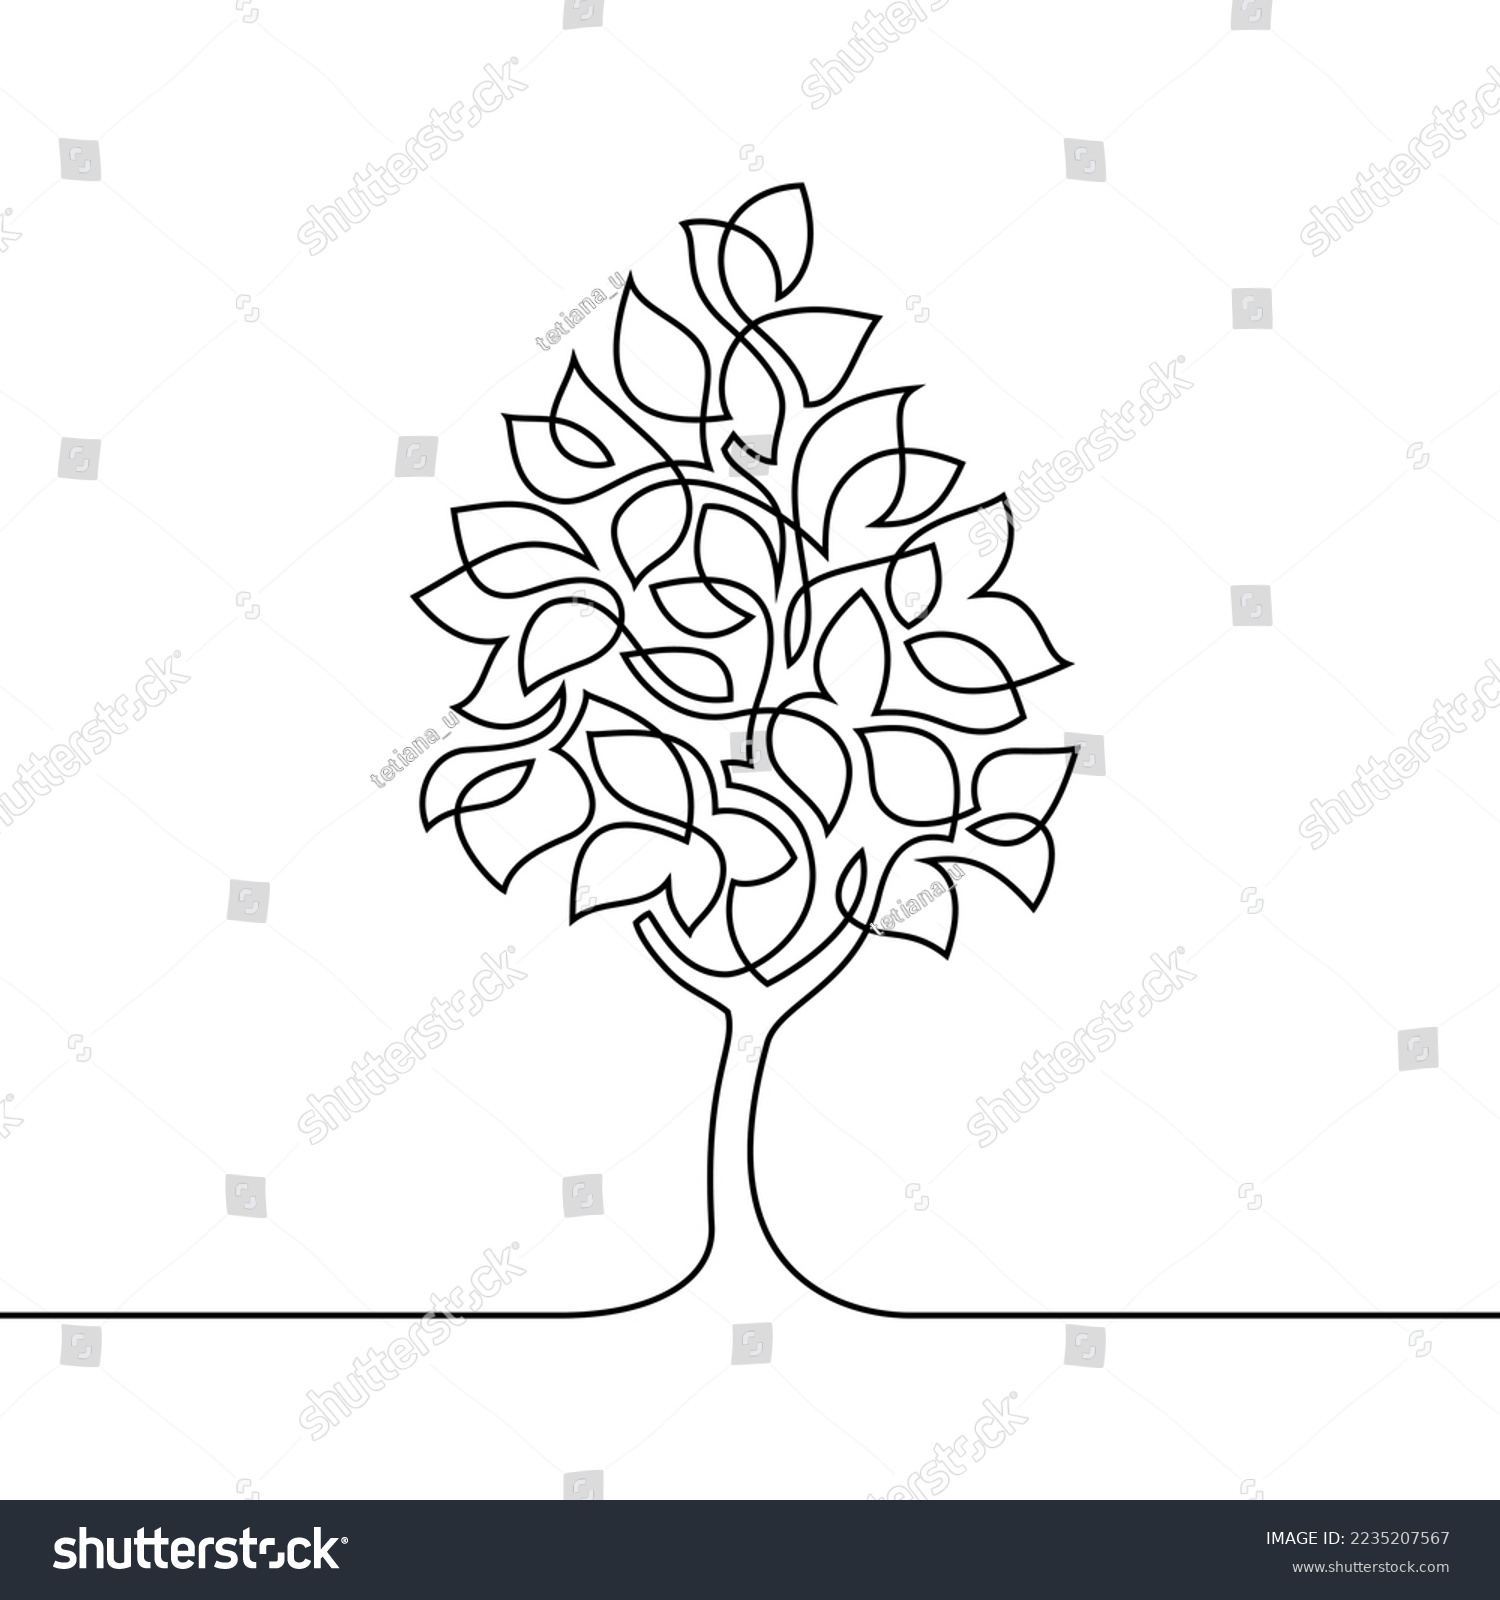 SVG of Abstract tree in continuous line art drawing style. Decorative tree with leaves black linear design isolated on white background. Vector illustration svg